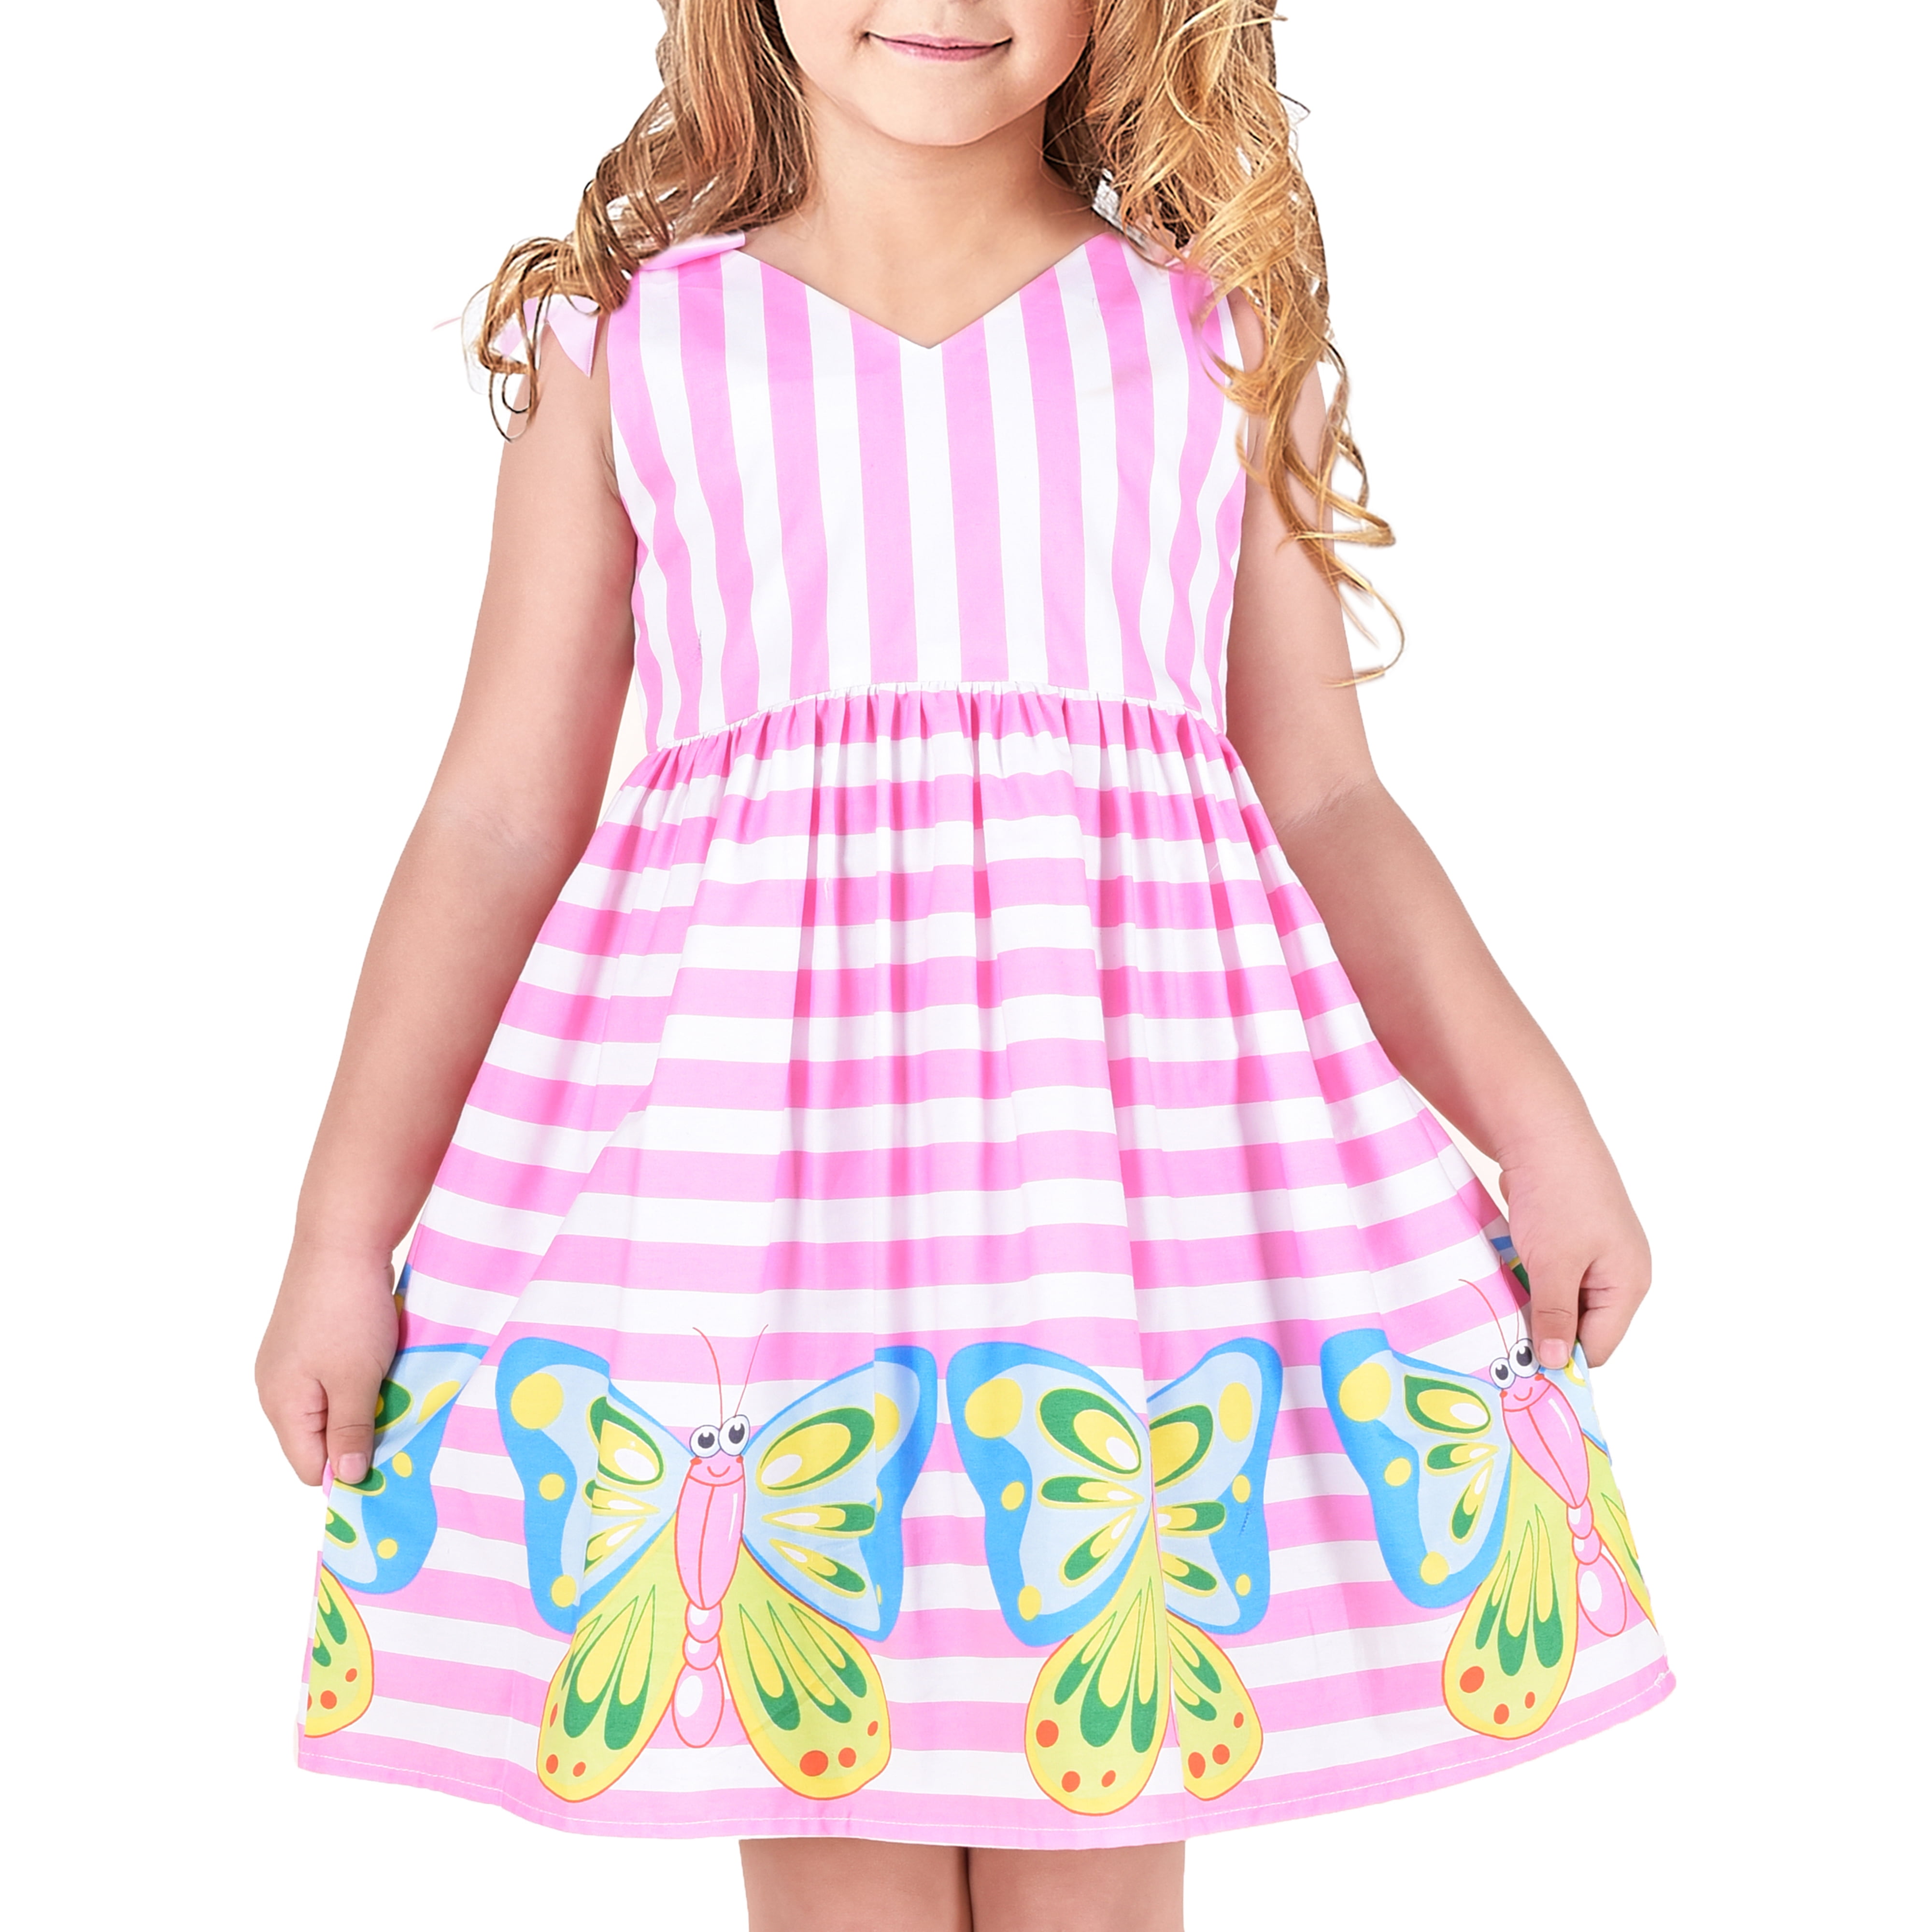 Girls New Hello Kitty Dress Kids Party A-line Cotton Pink White Age 4-10 Years 